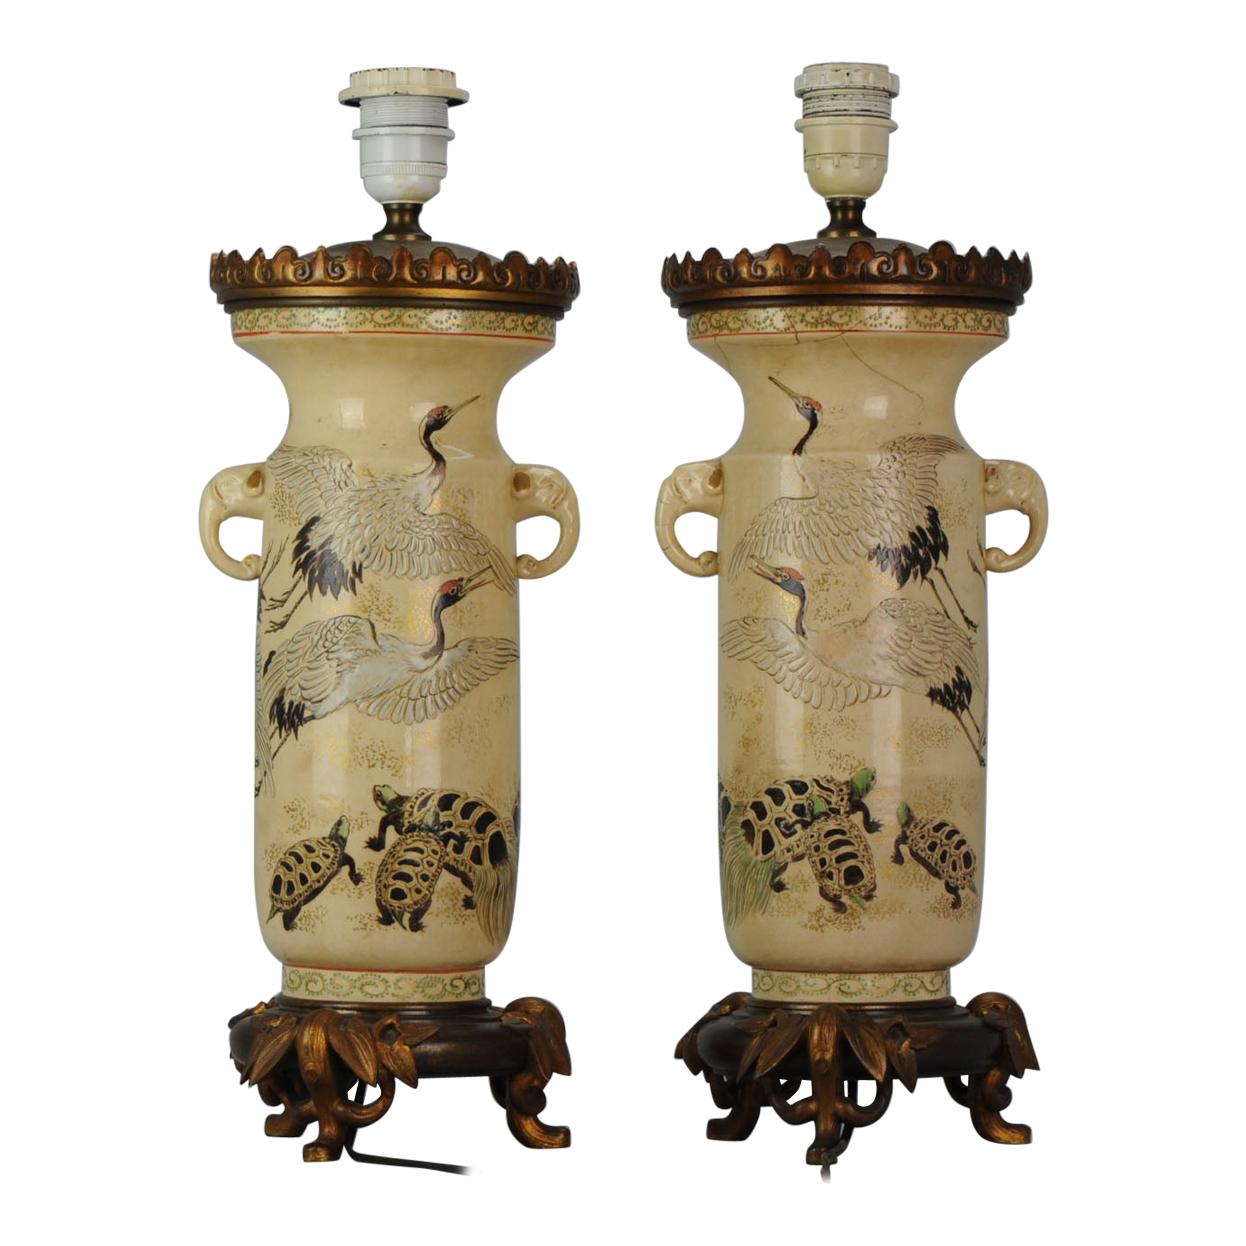 Lovely Antique Satsuma Lamp Vase Set with Cranes and Turtles, Japan 19th Century For Sale